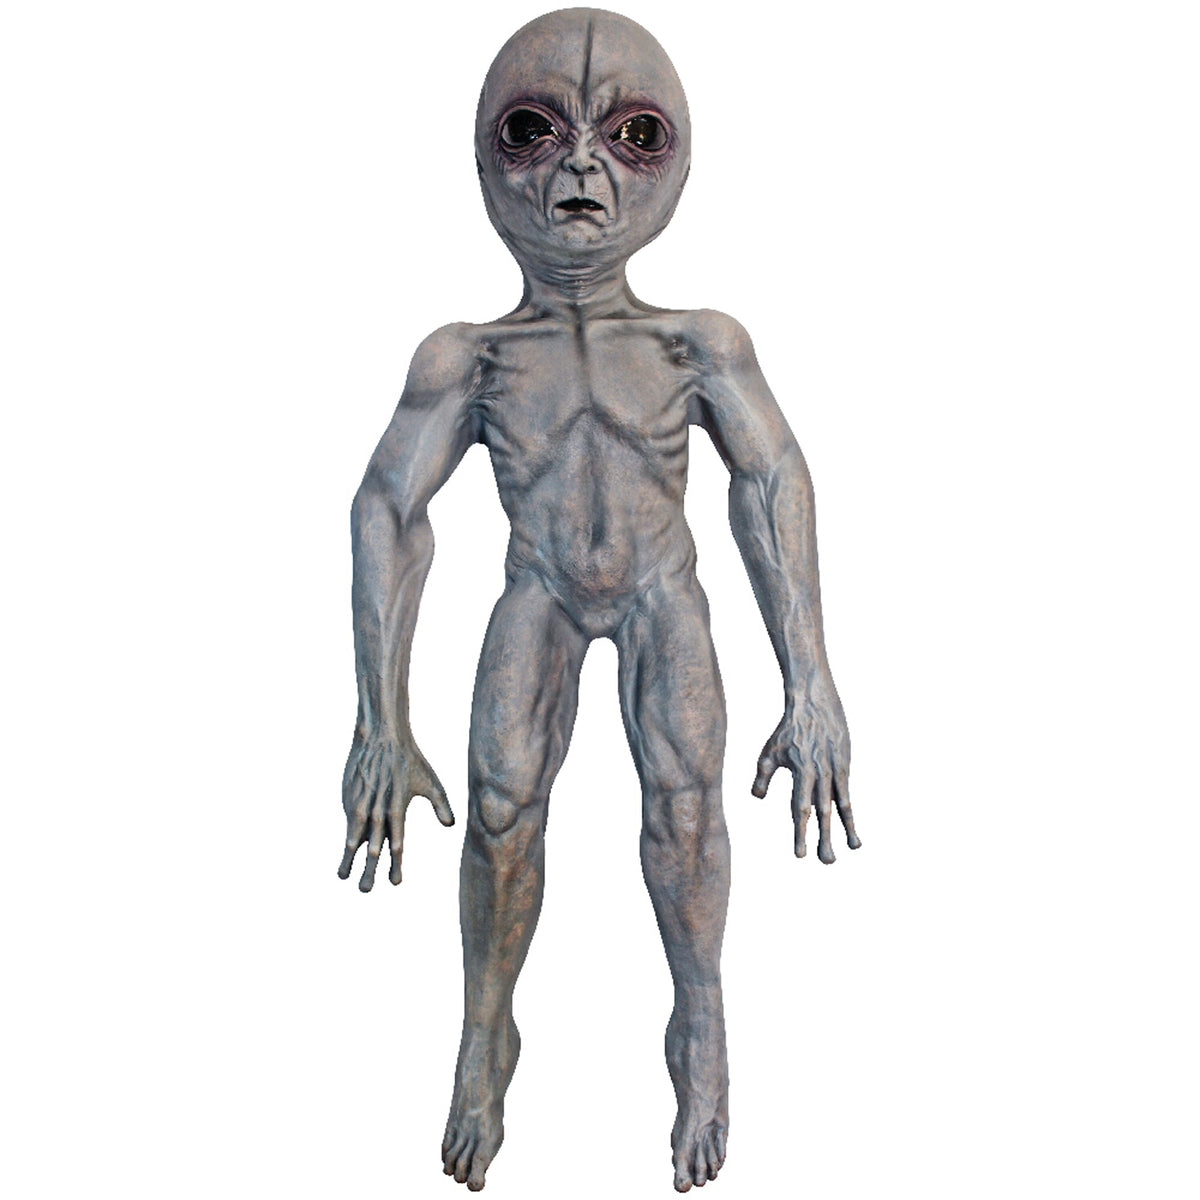 GHOULISH PRODUCTIONS Halloween Area 51 Alien Prop, 39 Inches, 1 Count